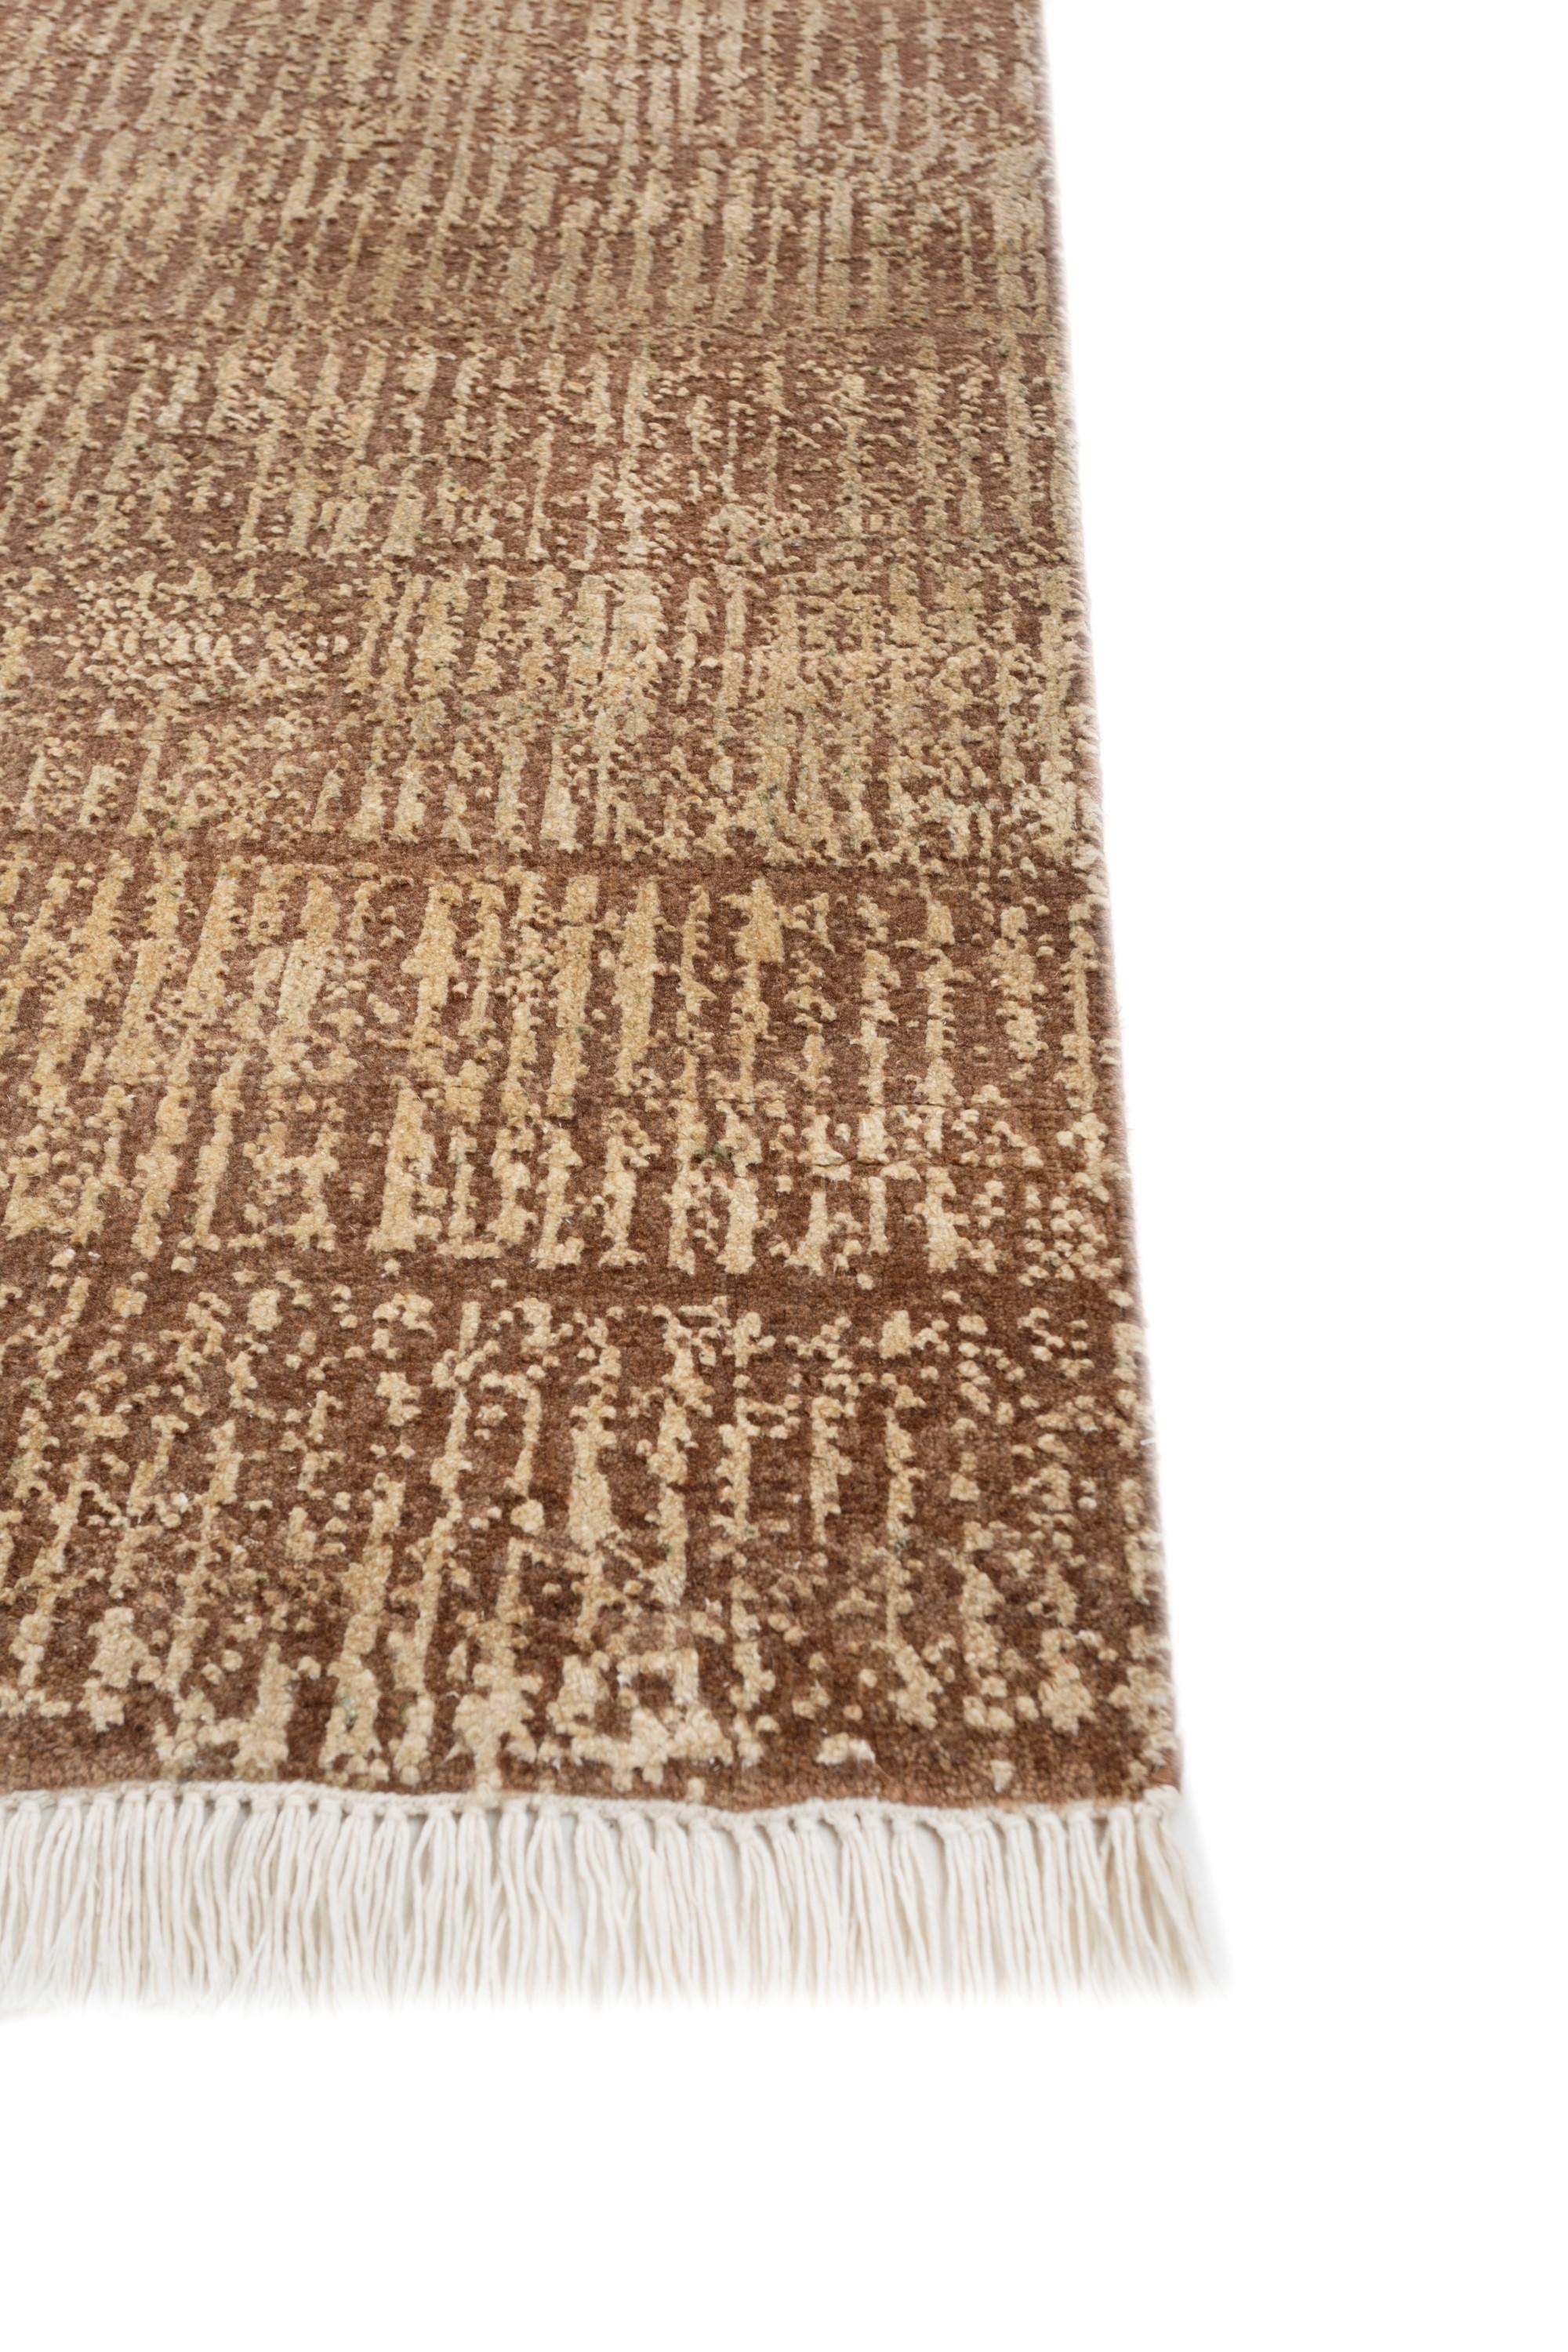 Organic Modern  Caramel Rug by Rural Weavers, Knotted, Wool, 240x300cm For Sale